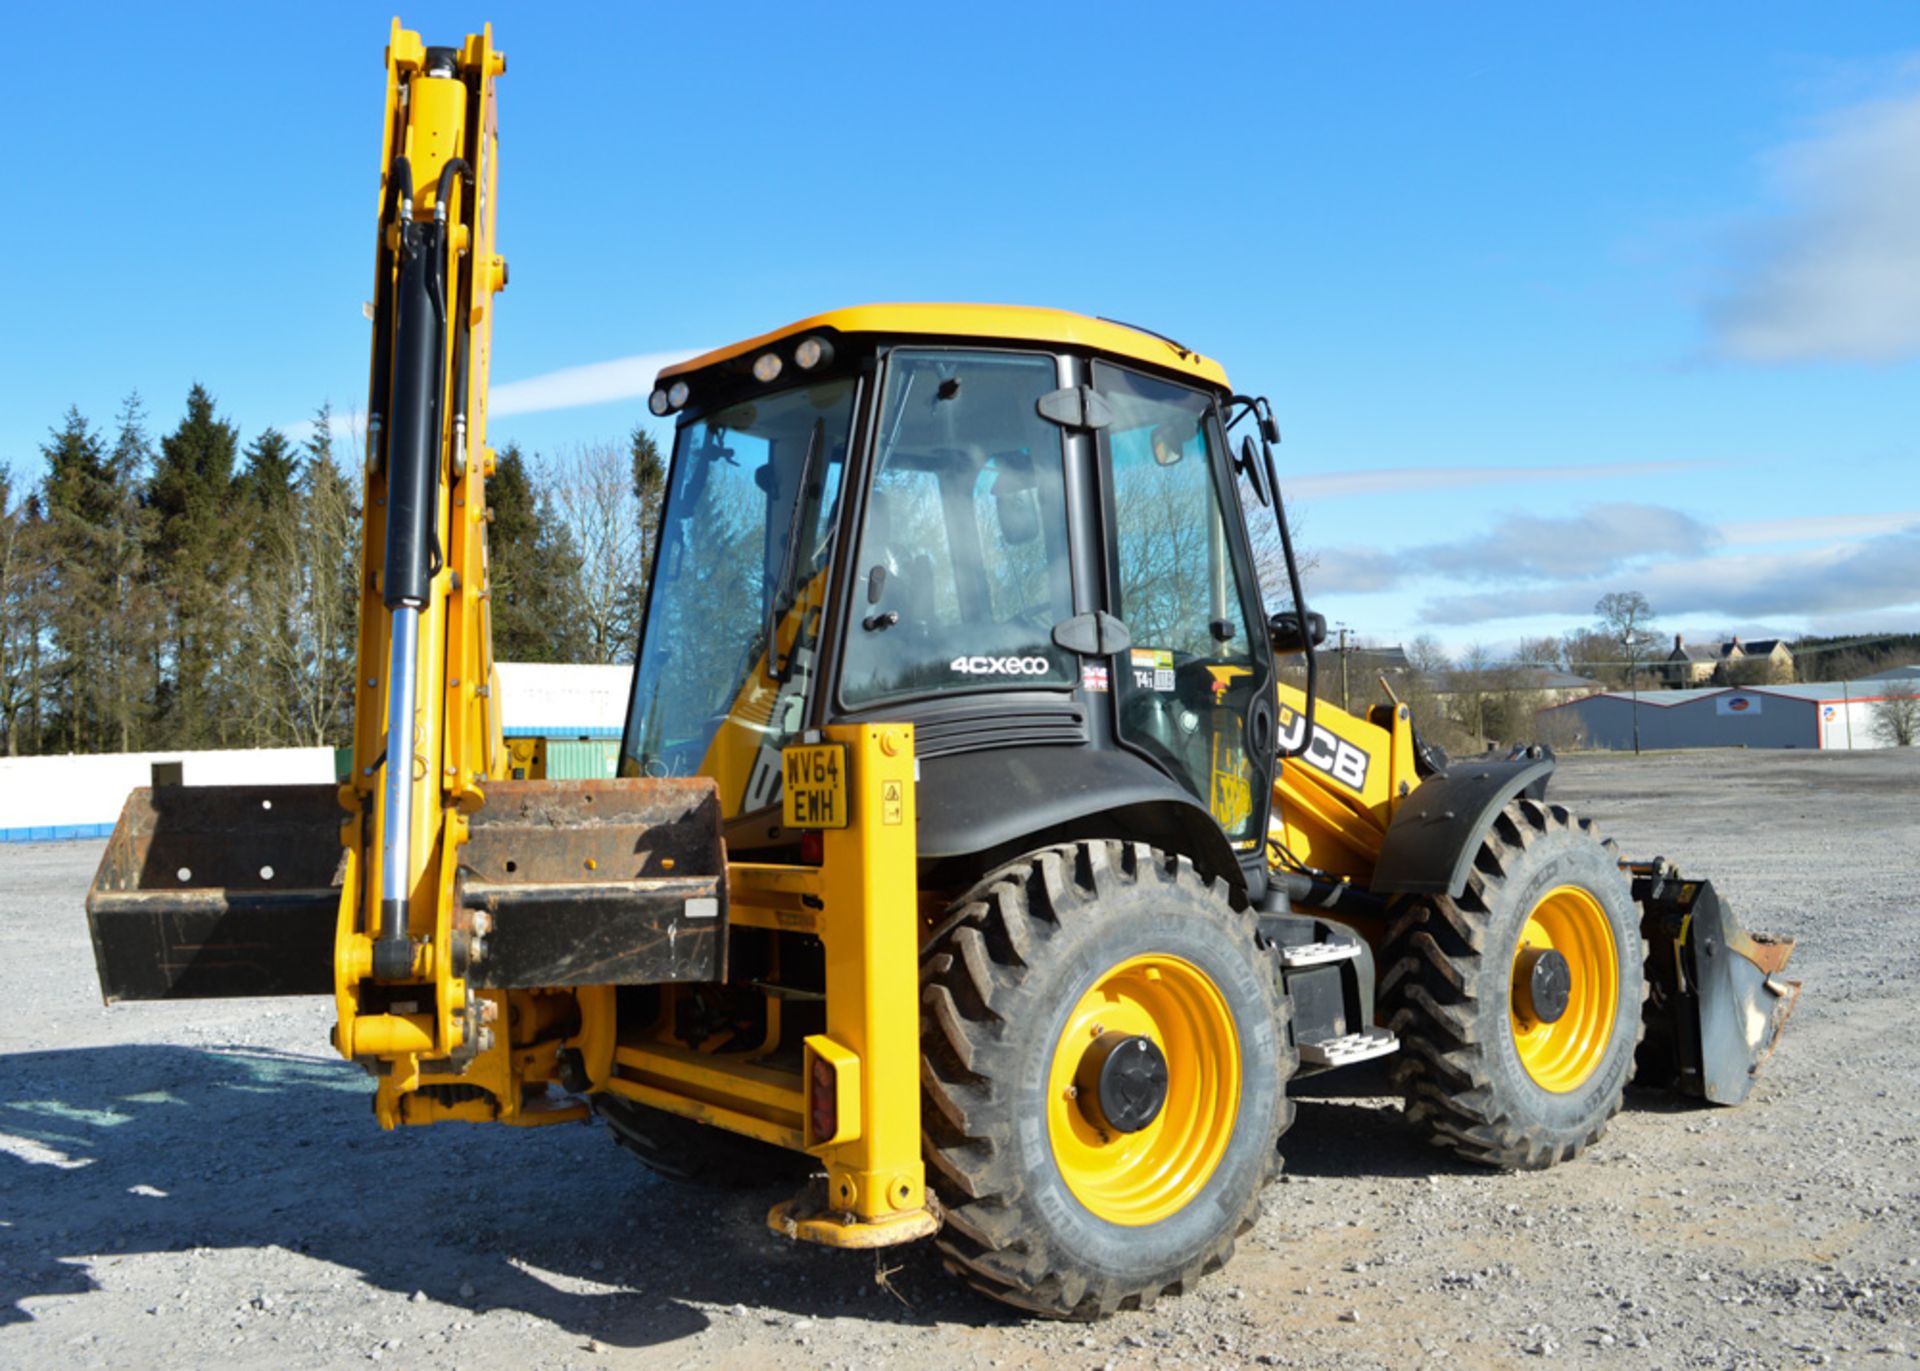 JCB 4CX Contractor backhoe loader Year: 2014 S/N: 2269627 Recorded Hours: 78 - Image 4 of 17